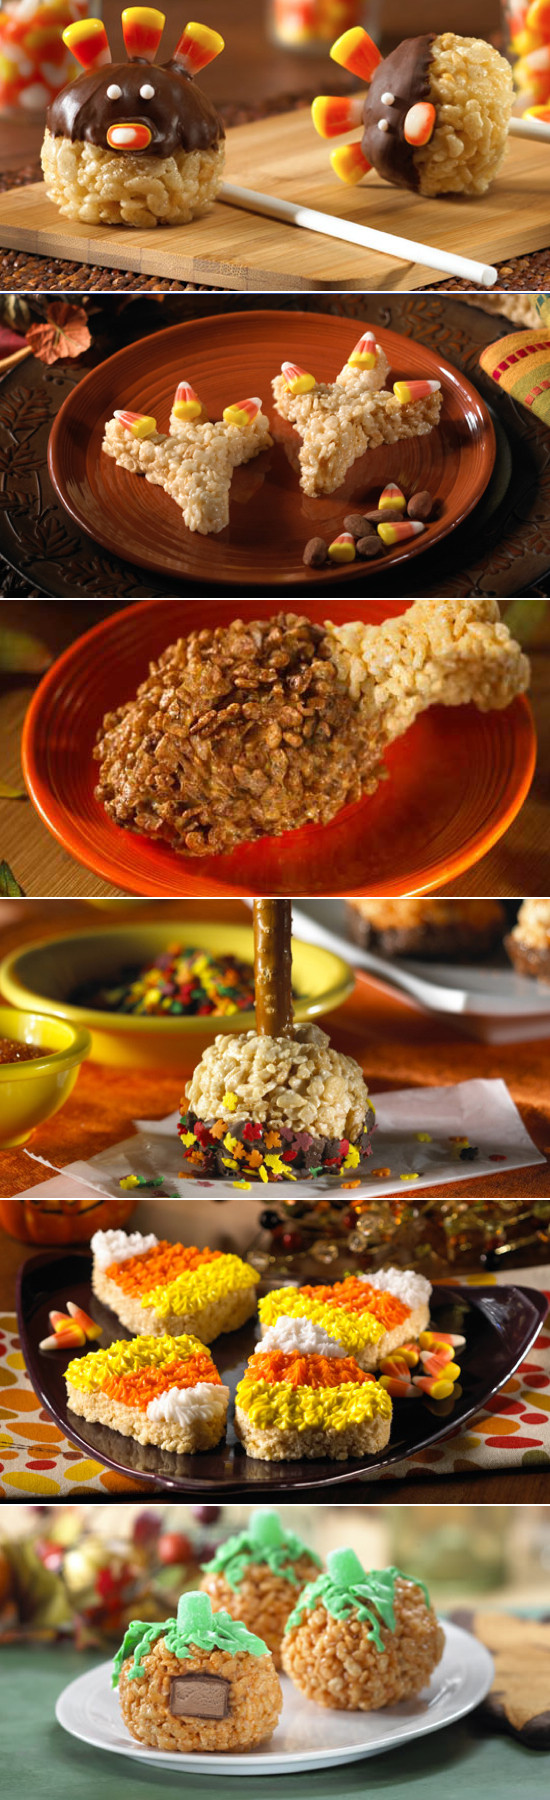 Thanksgiving Rice Recipe
 50 Cute Thanksgiving Treats For Kids